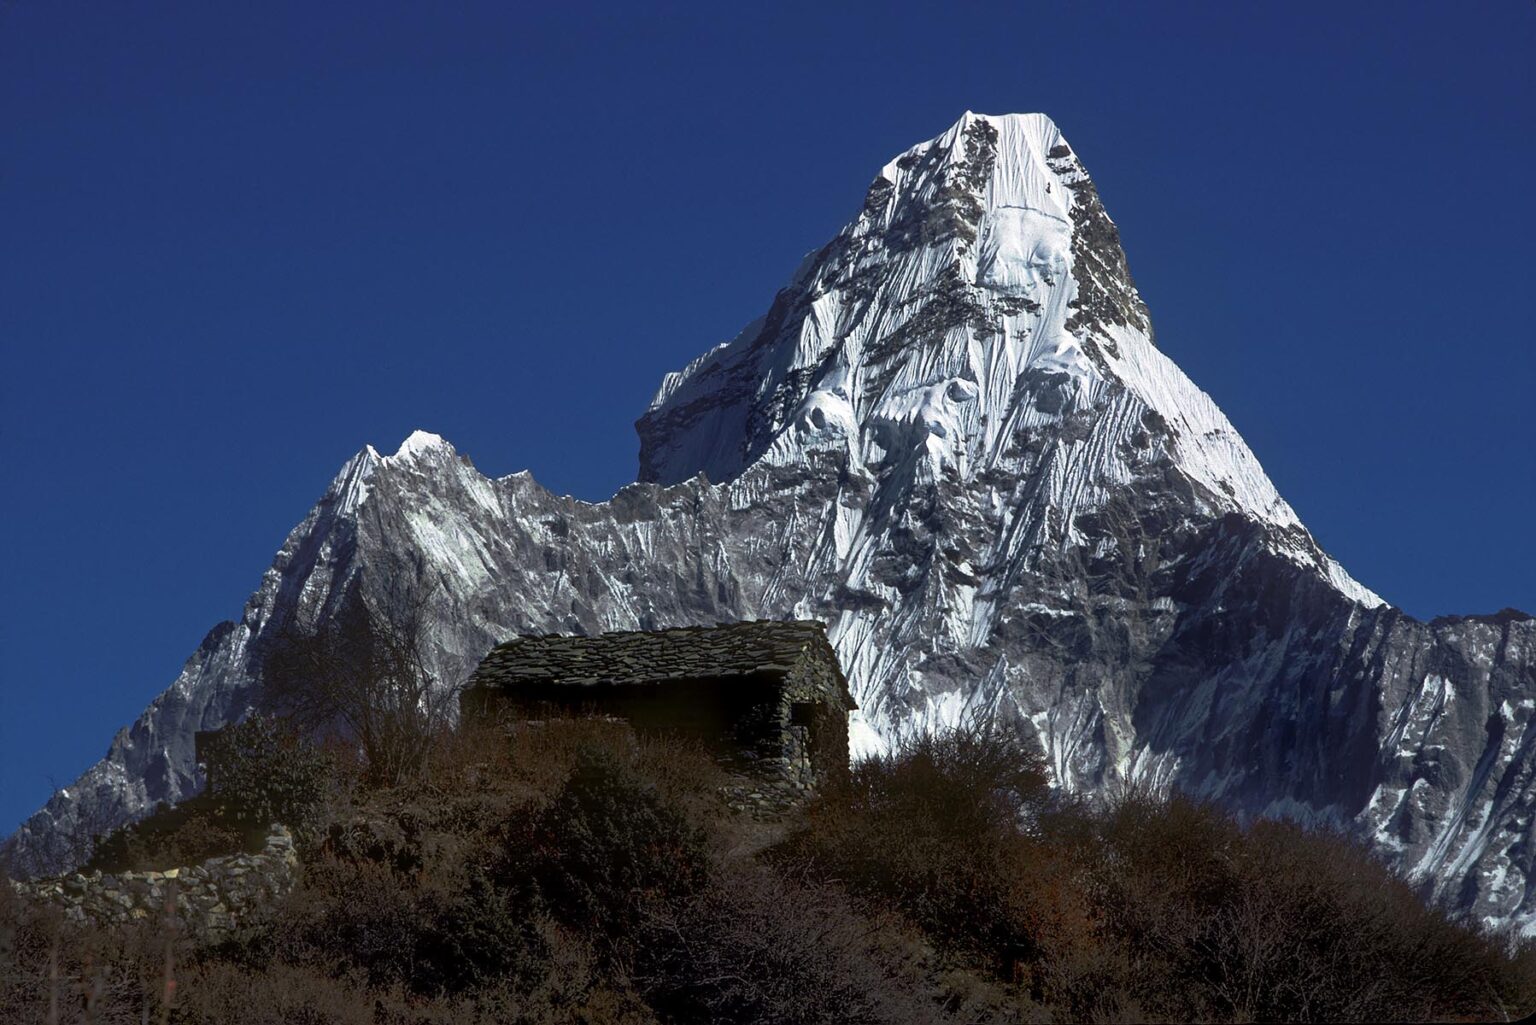 A tea house sits in front of Ama Dablam (which means mother cradling a child) and reaches a height of 22,493 ft - Khumbu Region